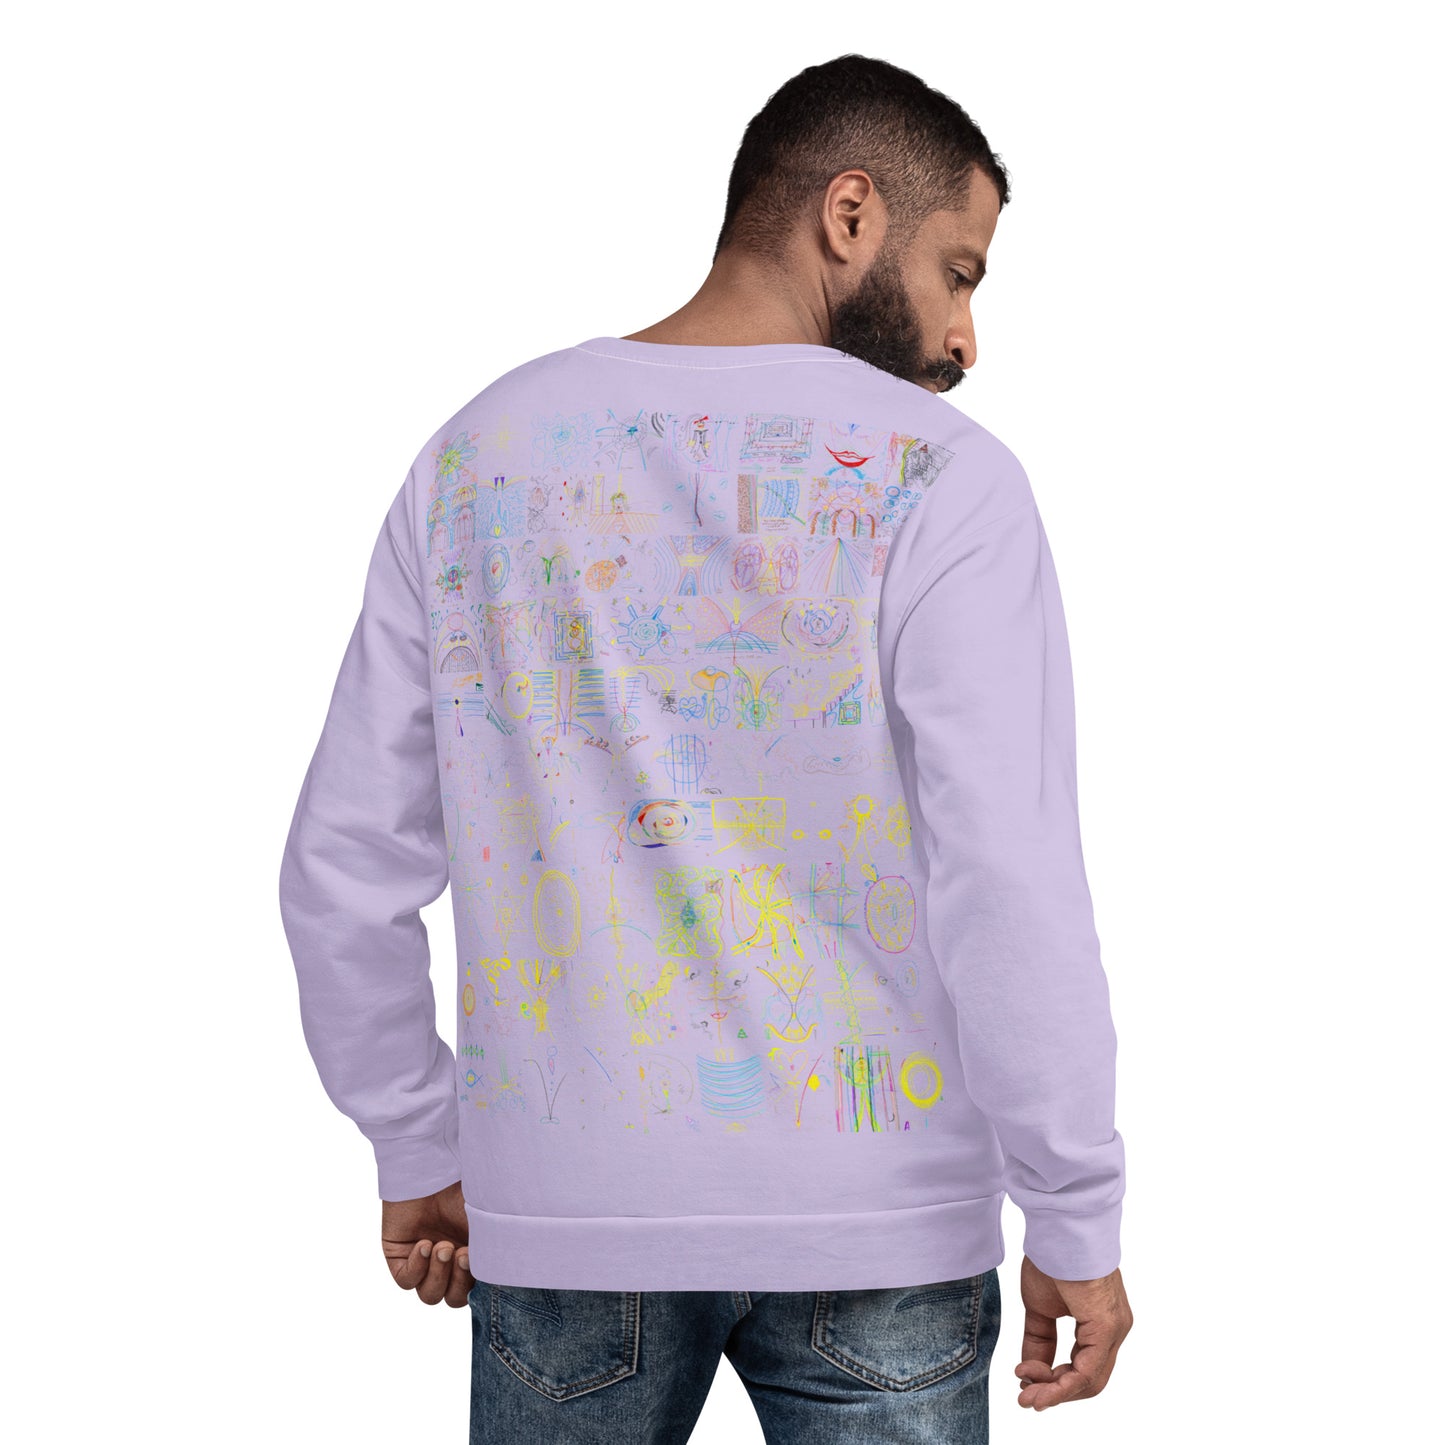 I will not fight to stay here. I cannot fight to stay here. sweatshirt in light purple